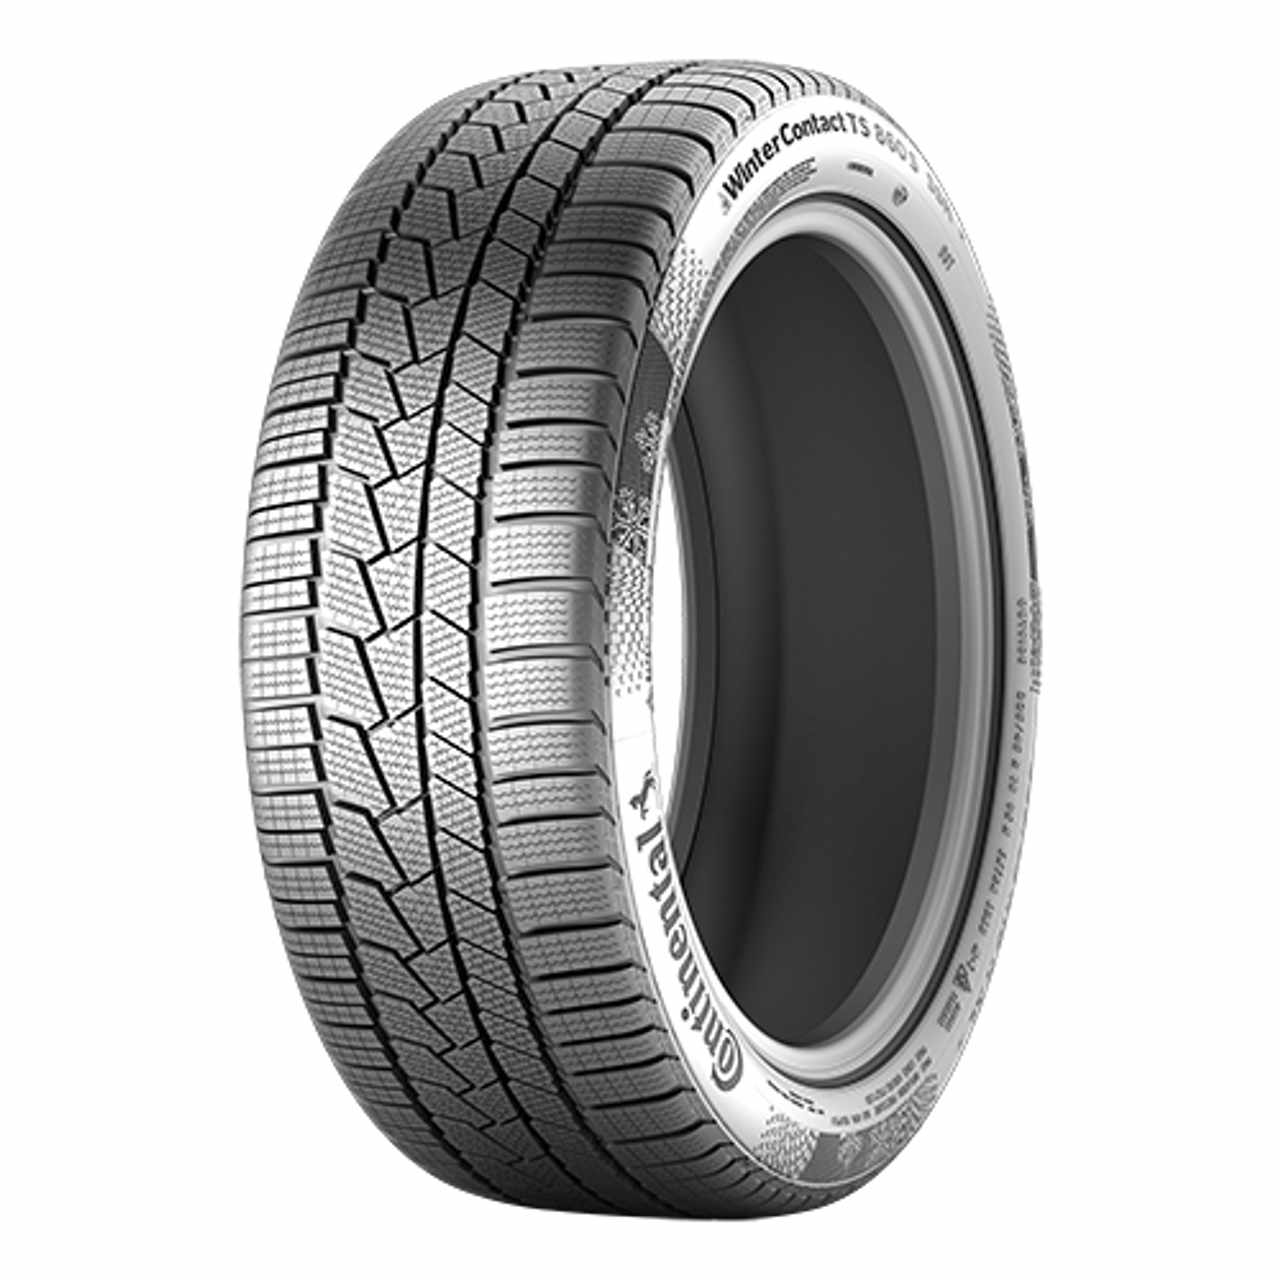 CONTINENTAL WINTERCONTACT TS 860 S (*) (EVc) SSR 255/55R20 110H BSW von Continental